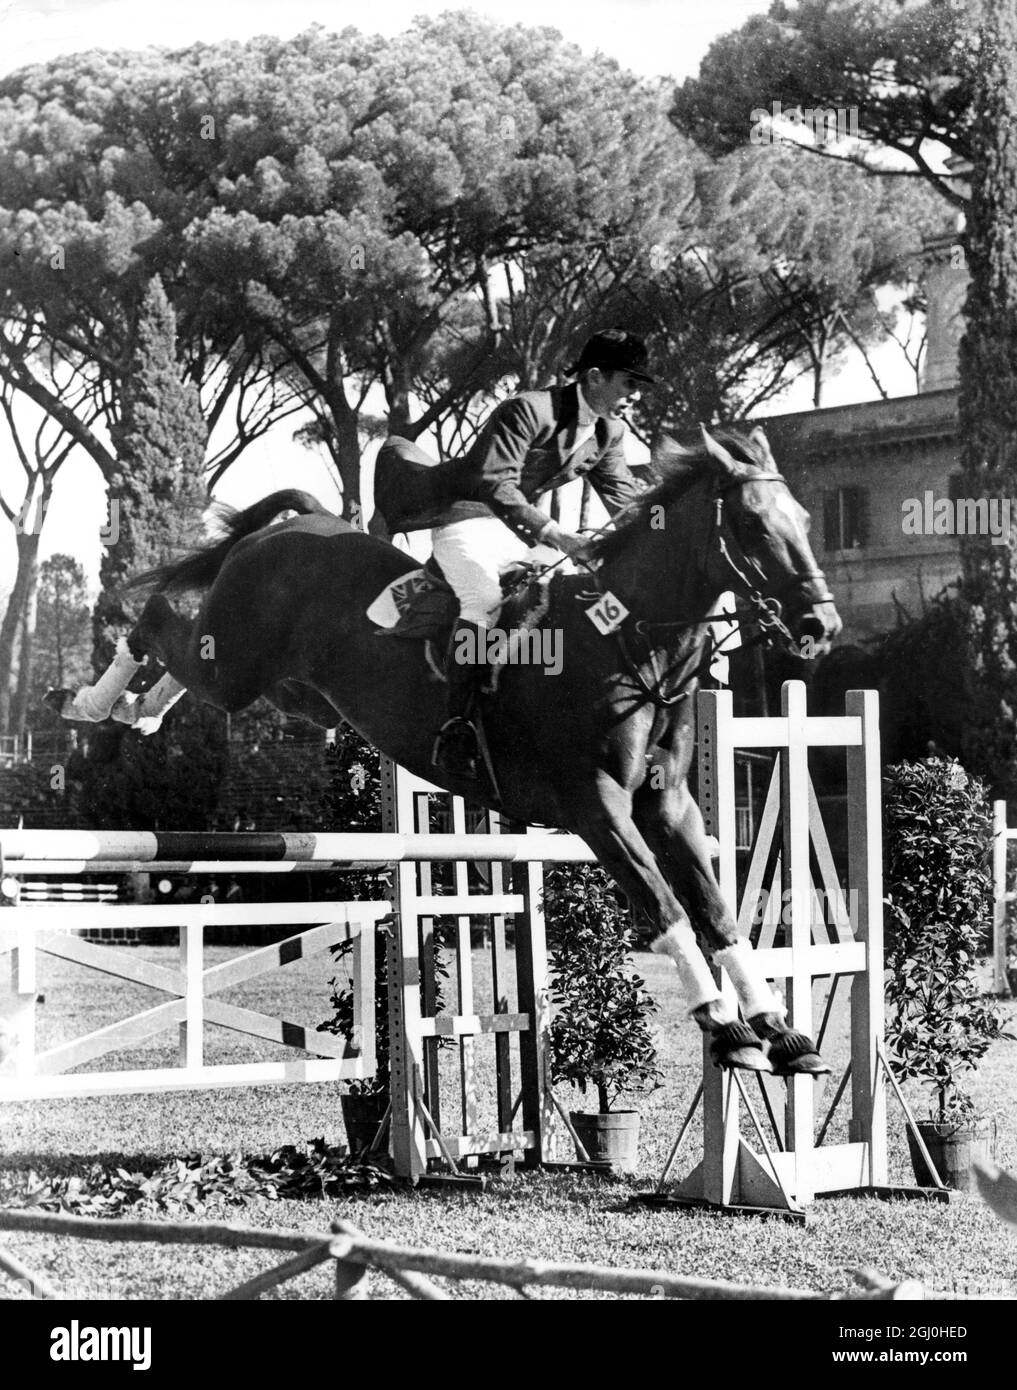 Britain's David Broome on Sunsalve during the final of the Grand Prix individual event in the Piazza di Siena in Rome. He finished third to get the bronze medal. - 8th September 1960 ©TopFoto Stock Photo